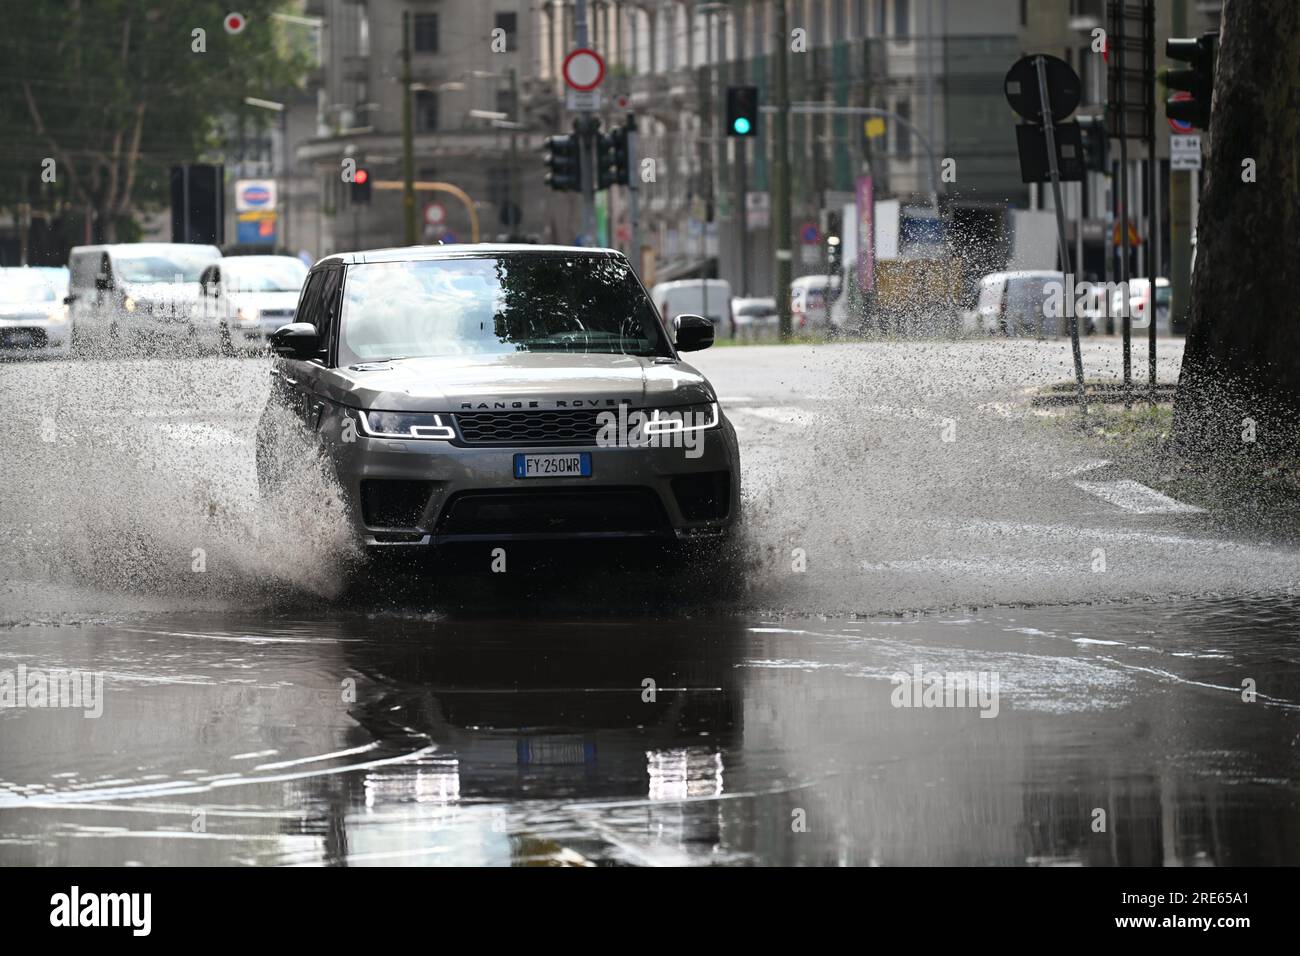 Milan, Italy. 25th July, 2023. A vehicle drives through a flooded street after thunderstorms in Milan, Italy, on July 25, 2023. While the southern two-thirds of Italy struggled under the oppressive heat, most of the northern area was pelted by thunderstorms and over-sized hail. Media reports said the emergency services in Milan had responded to more than 200 requests for help related to flooding, fallen trees, and damage to cars and homes, since a severe storm hit the city late Monday. Credit: Str/Xinhua/Alamy Live News Stock Photo